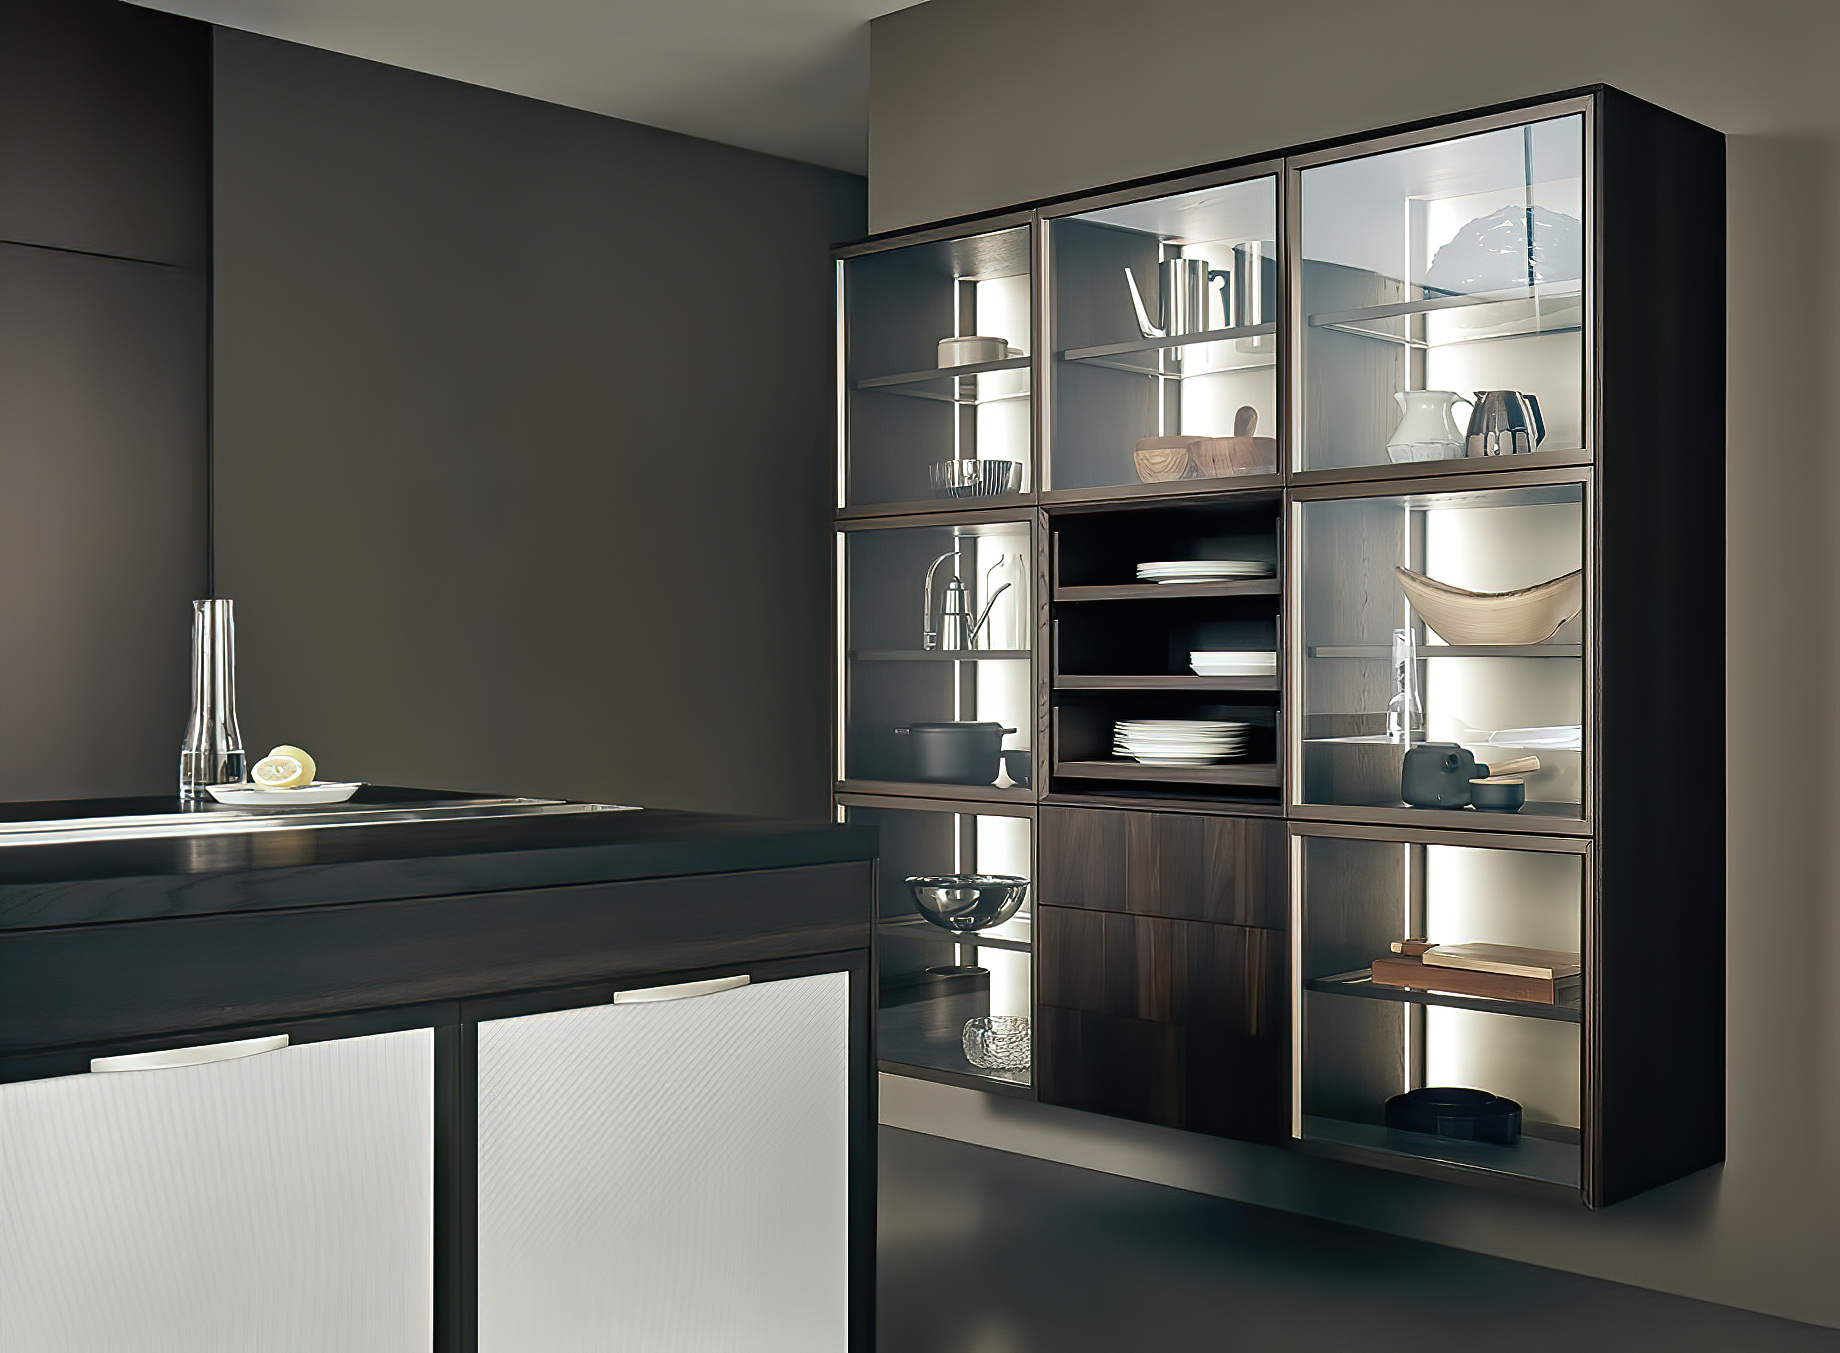 K-lab Contemporary Kitchen Ernestomeda Italy – Giuseppe Bavuso – Show Glass Fronted Unit